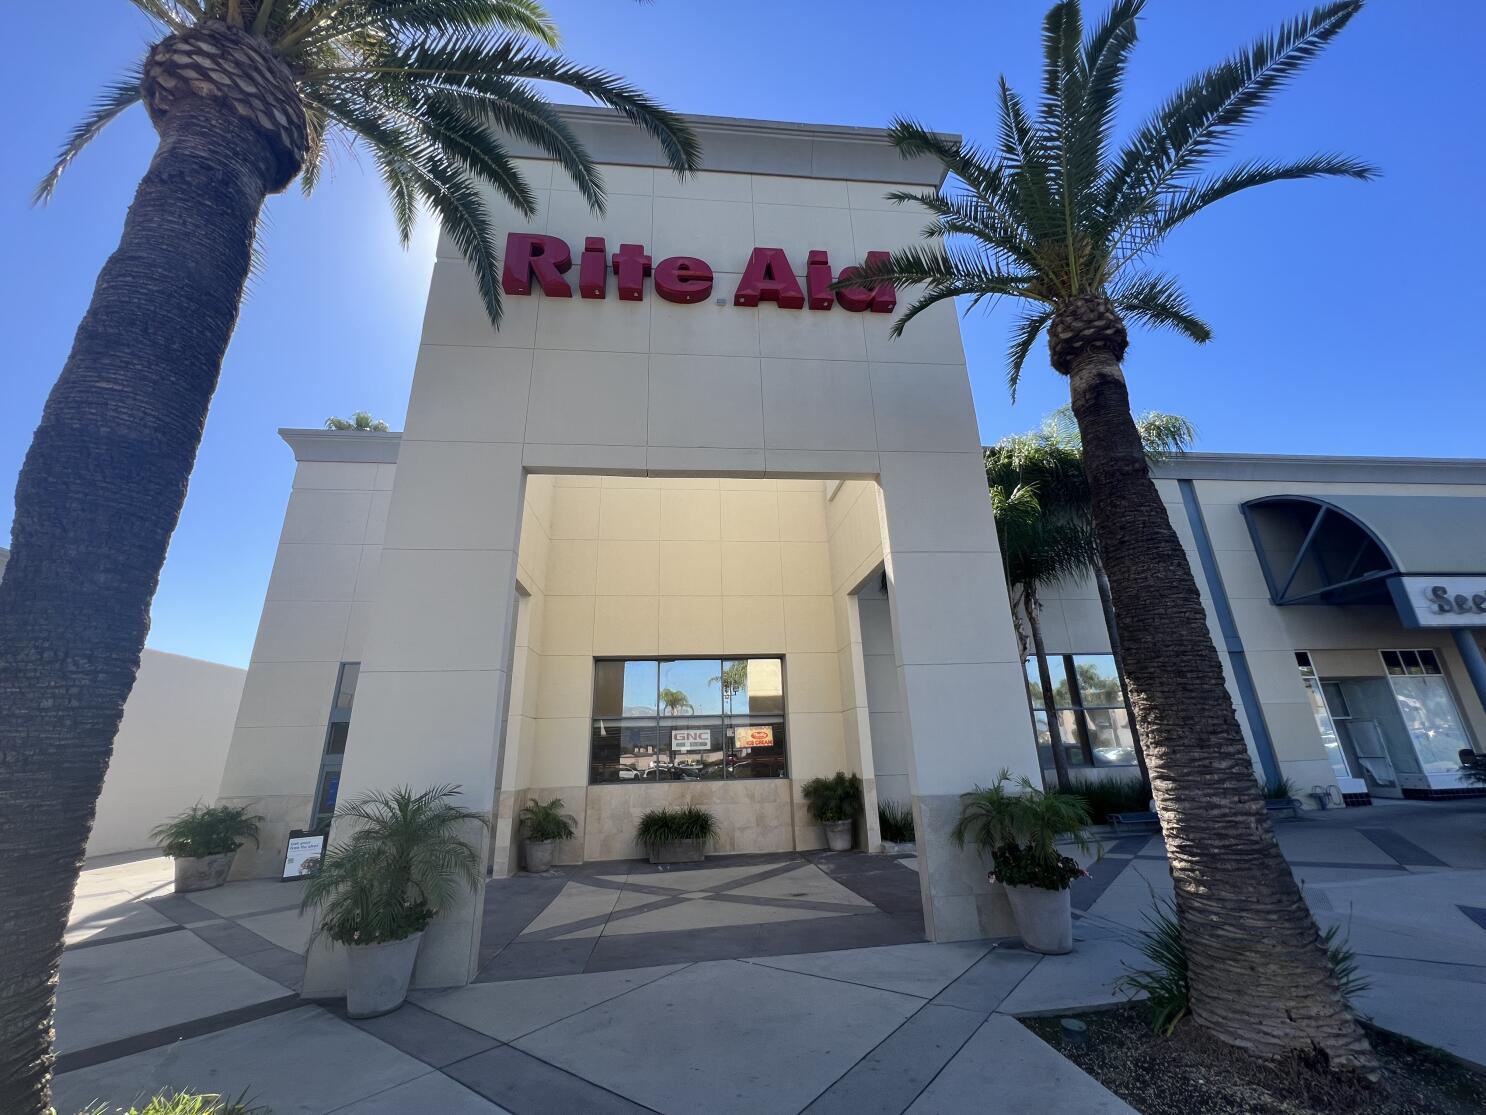 Rite Aid seeks Chapter 11 bankruptcy protection as it deals with